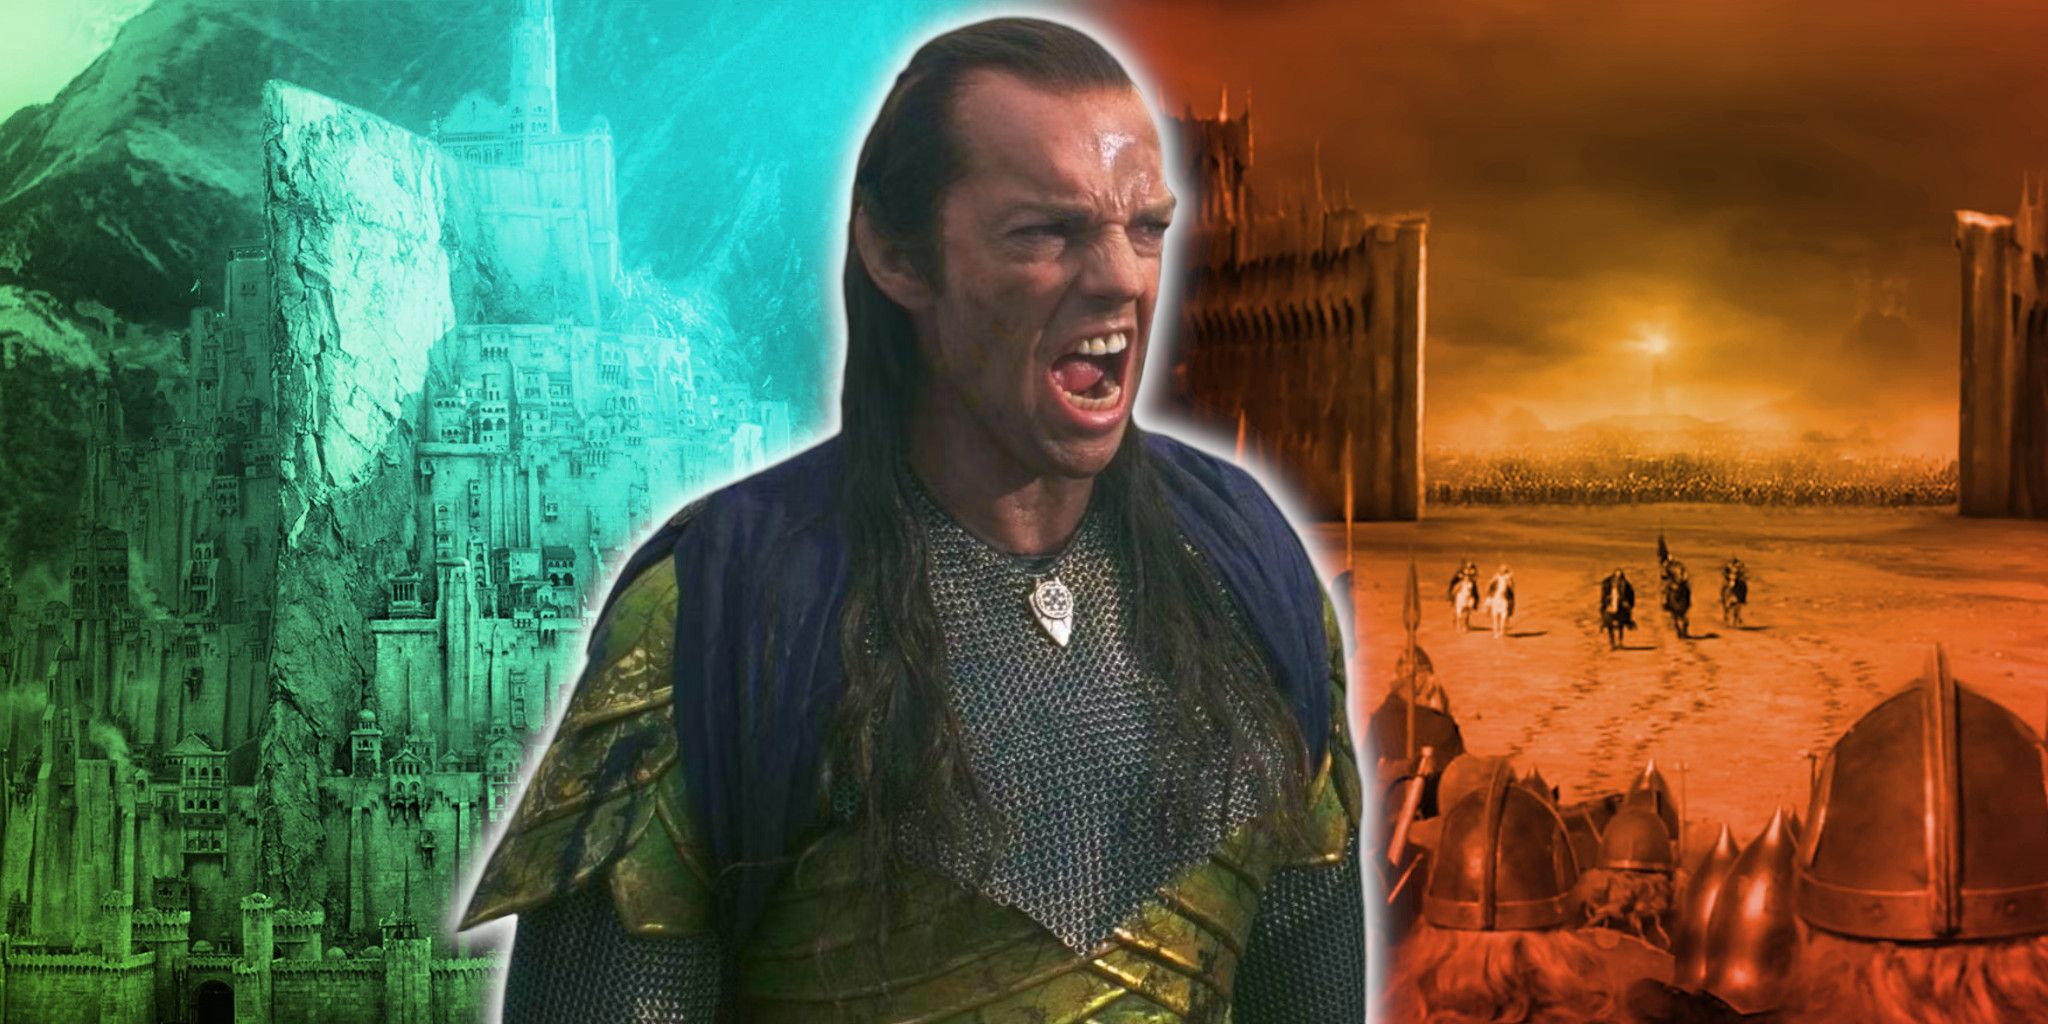 Elrond in front of Minas Tirith and the Black Gate from The Lord of the Rings: The Return of the King